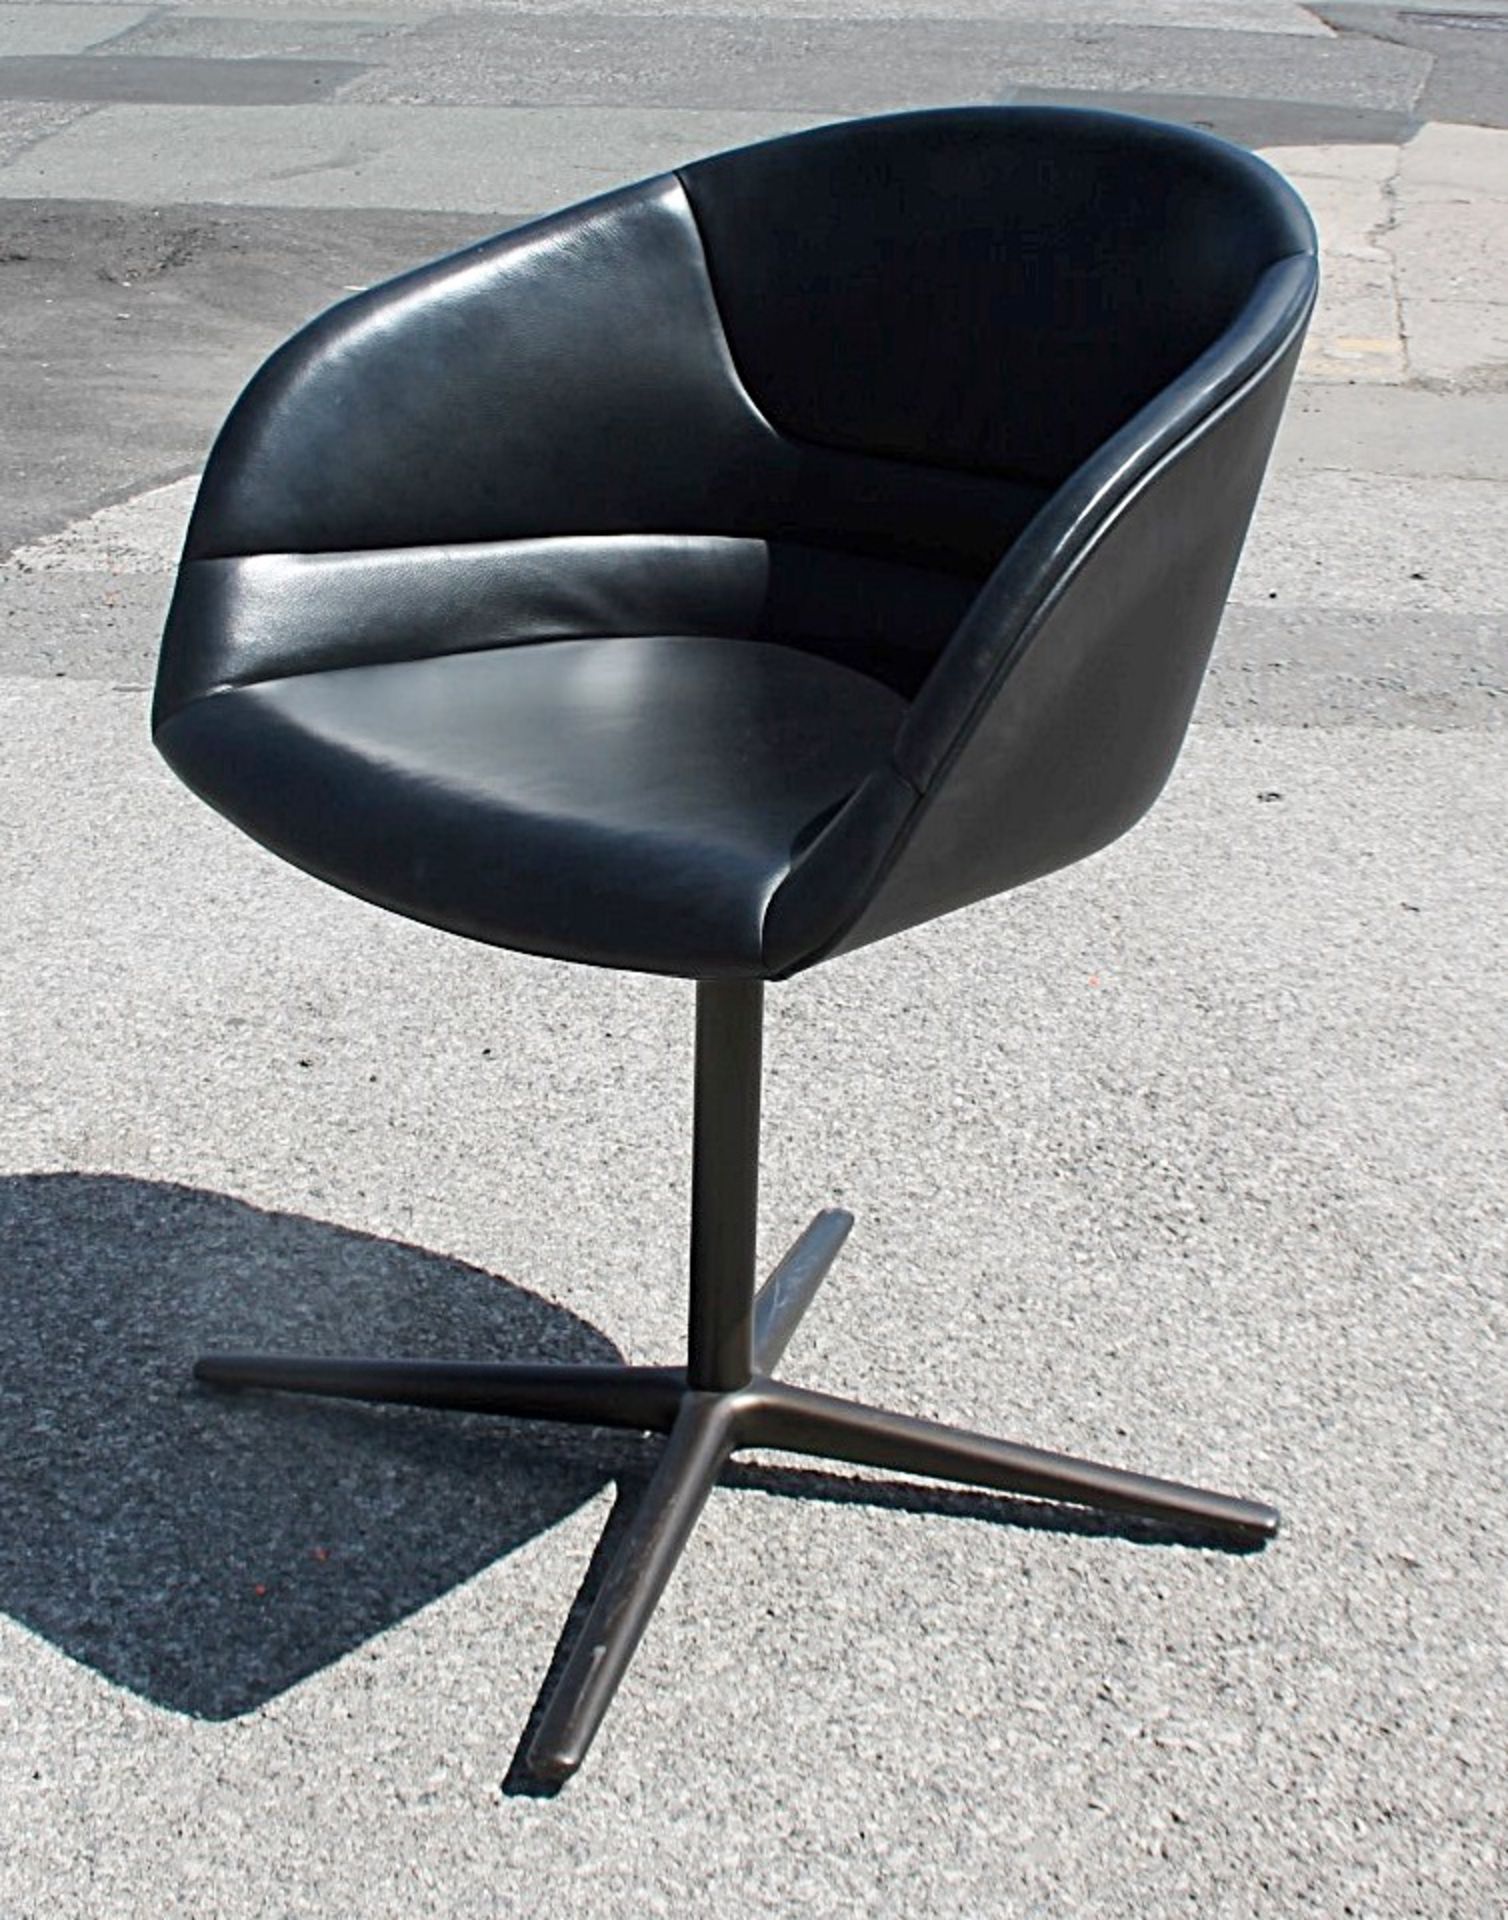 1 x WALTER KNOLL 'Kyo' Genuine Leather Upholstered Chair - Original RRP £1,979 - CL753 - Ref: - Image 4 of 6